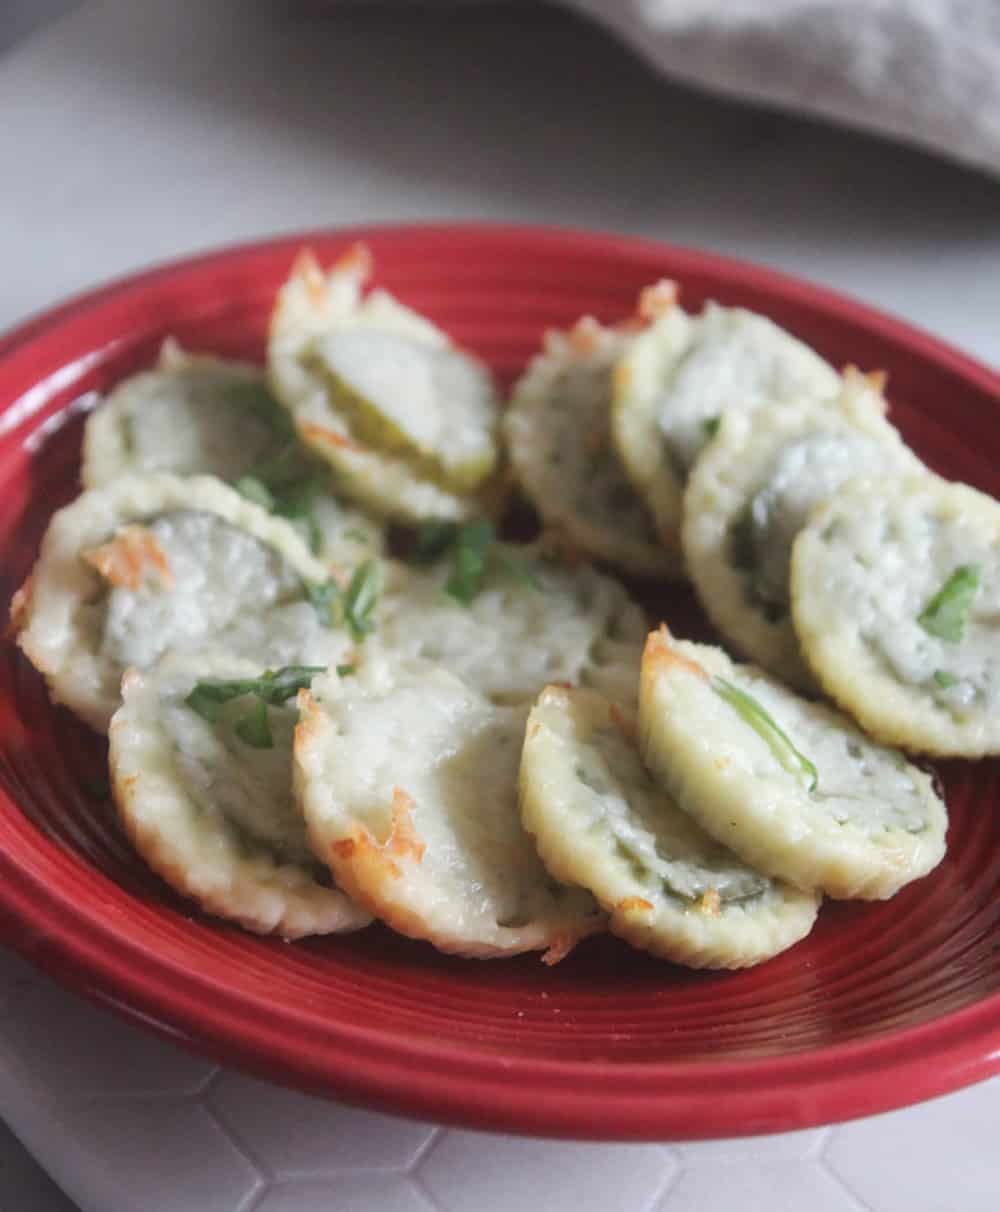 A pictue of cheese bites with pickles on a plate